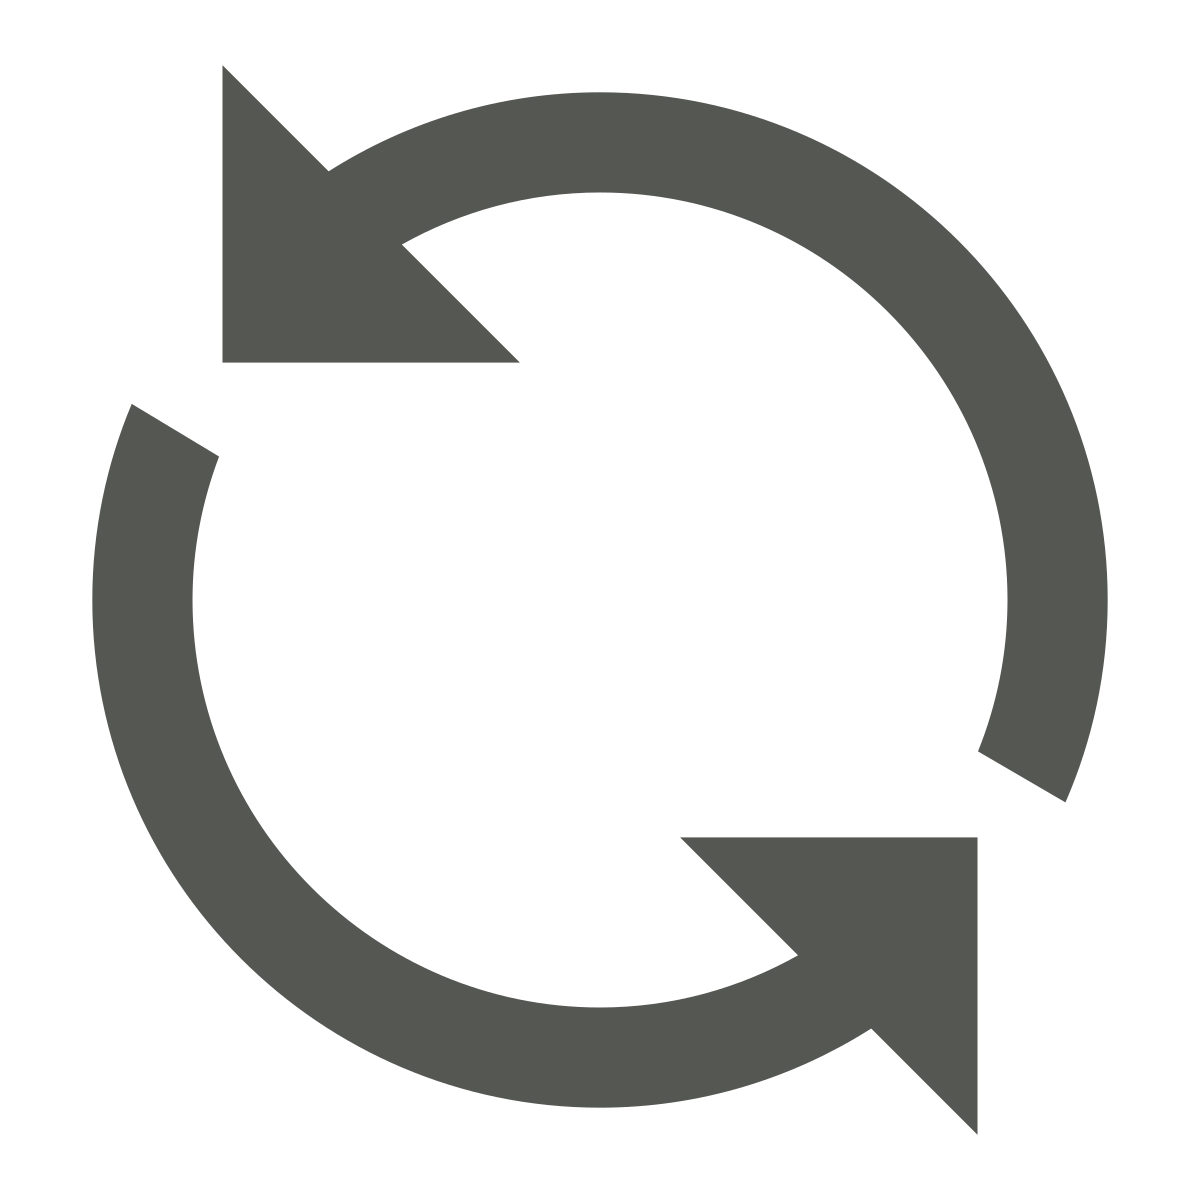 File:Refresh icon.svg - Wikimedia Commons